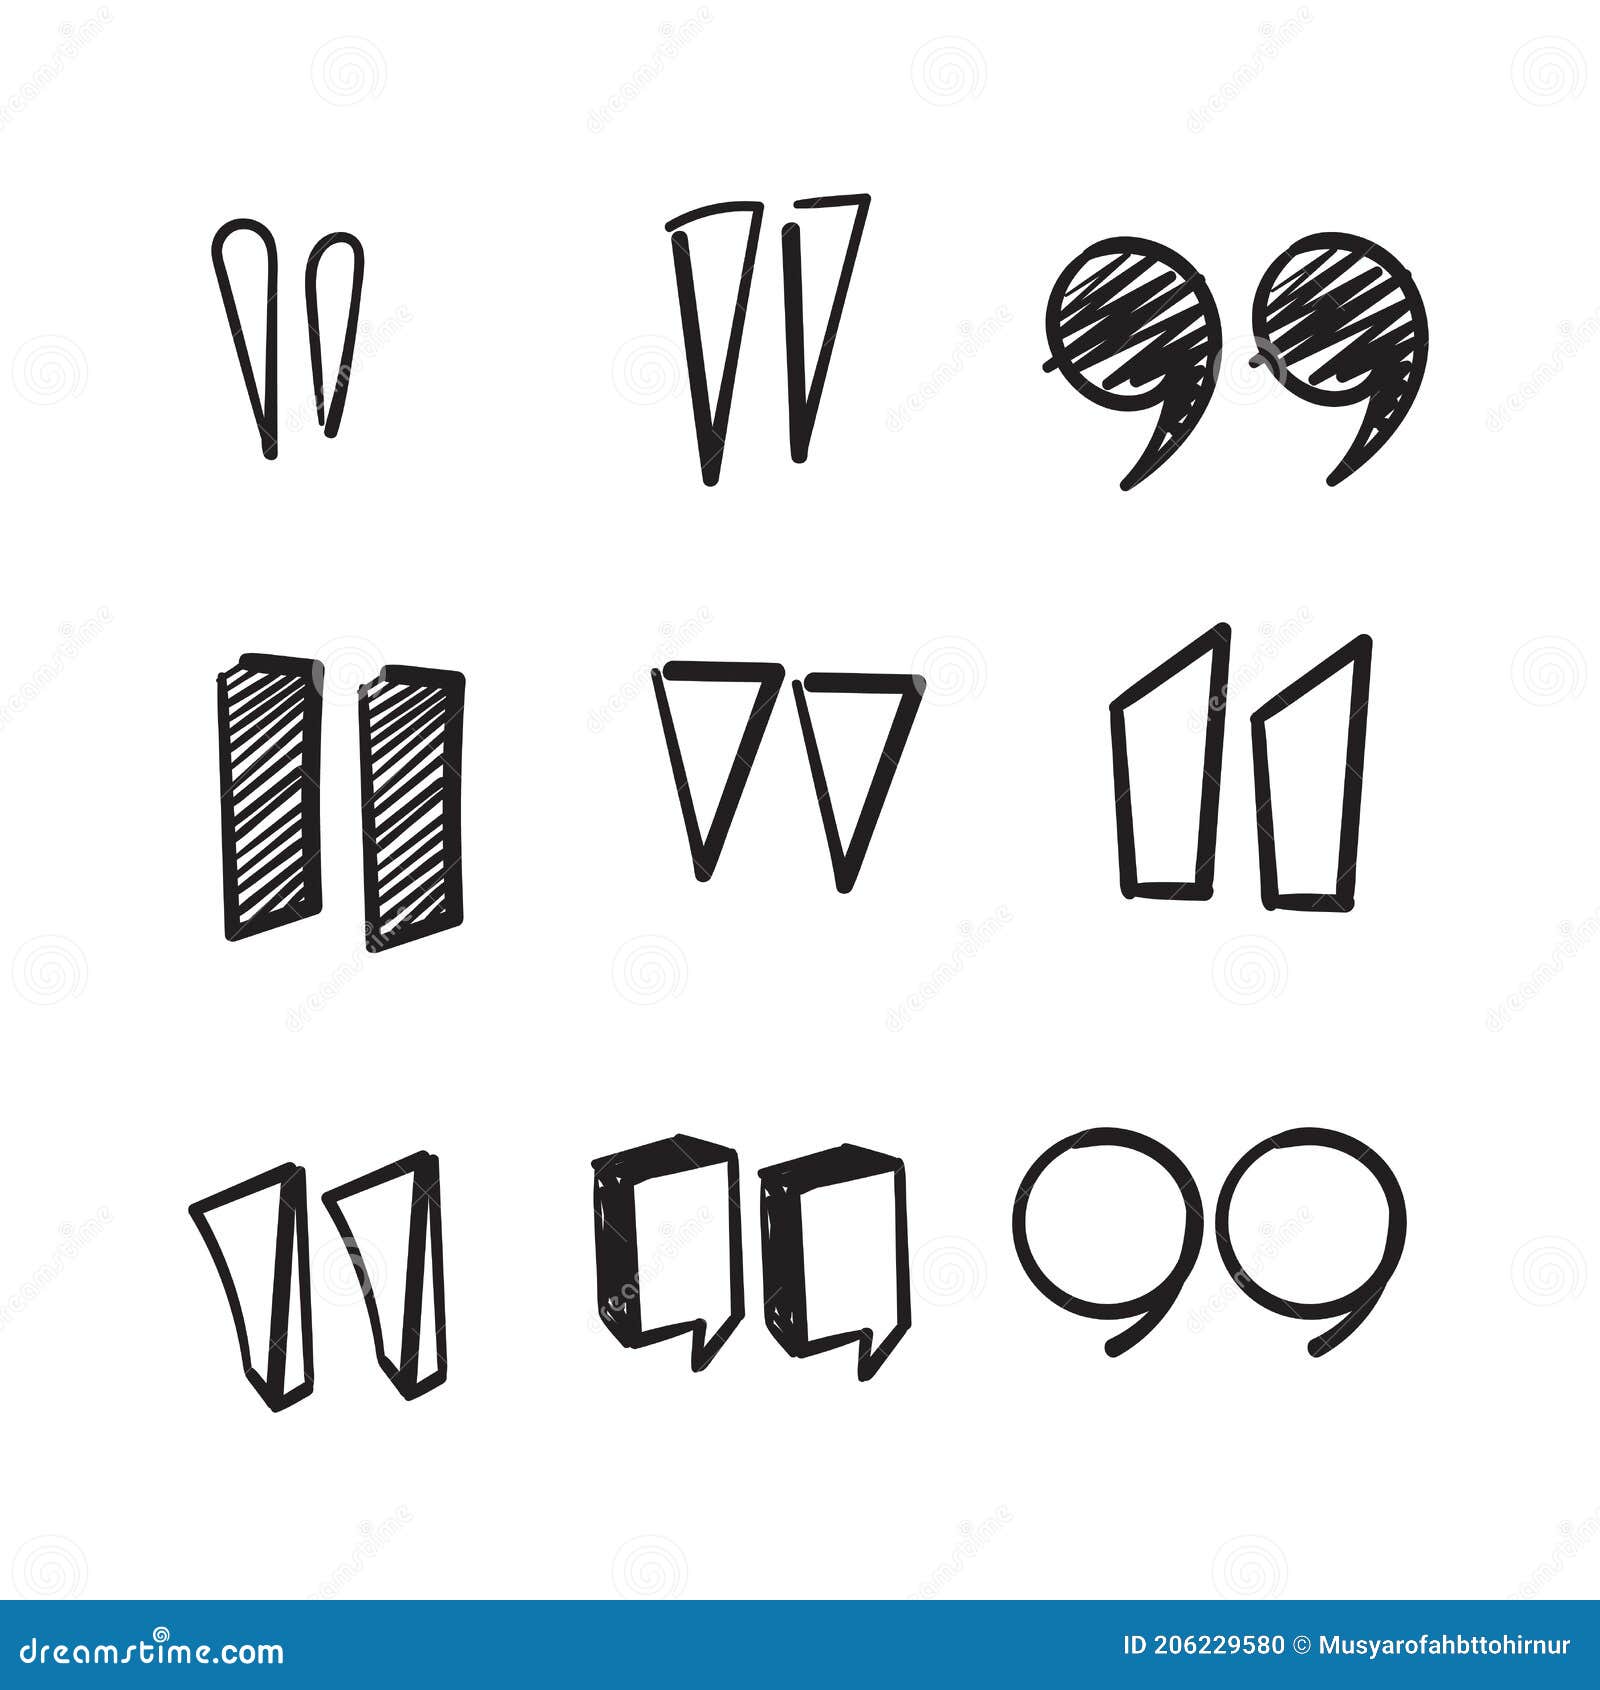 hand drawn doodle quotation mark icon   